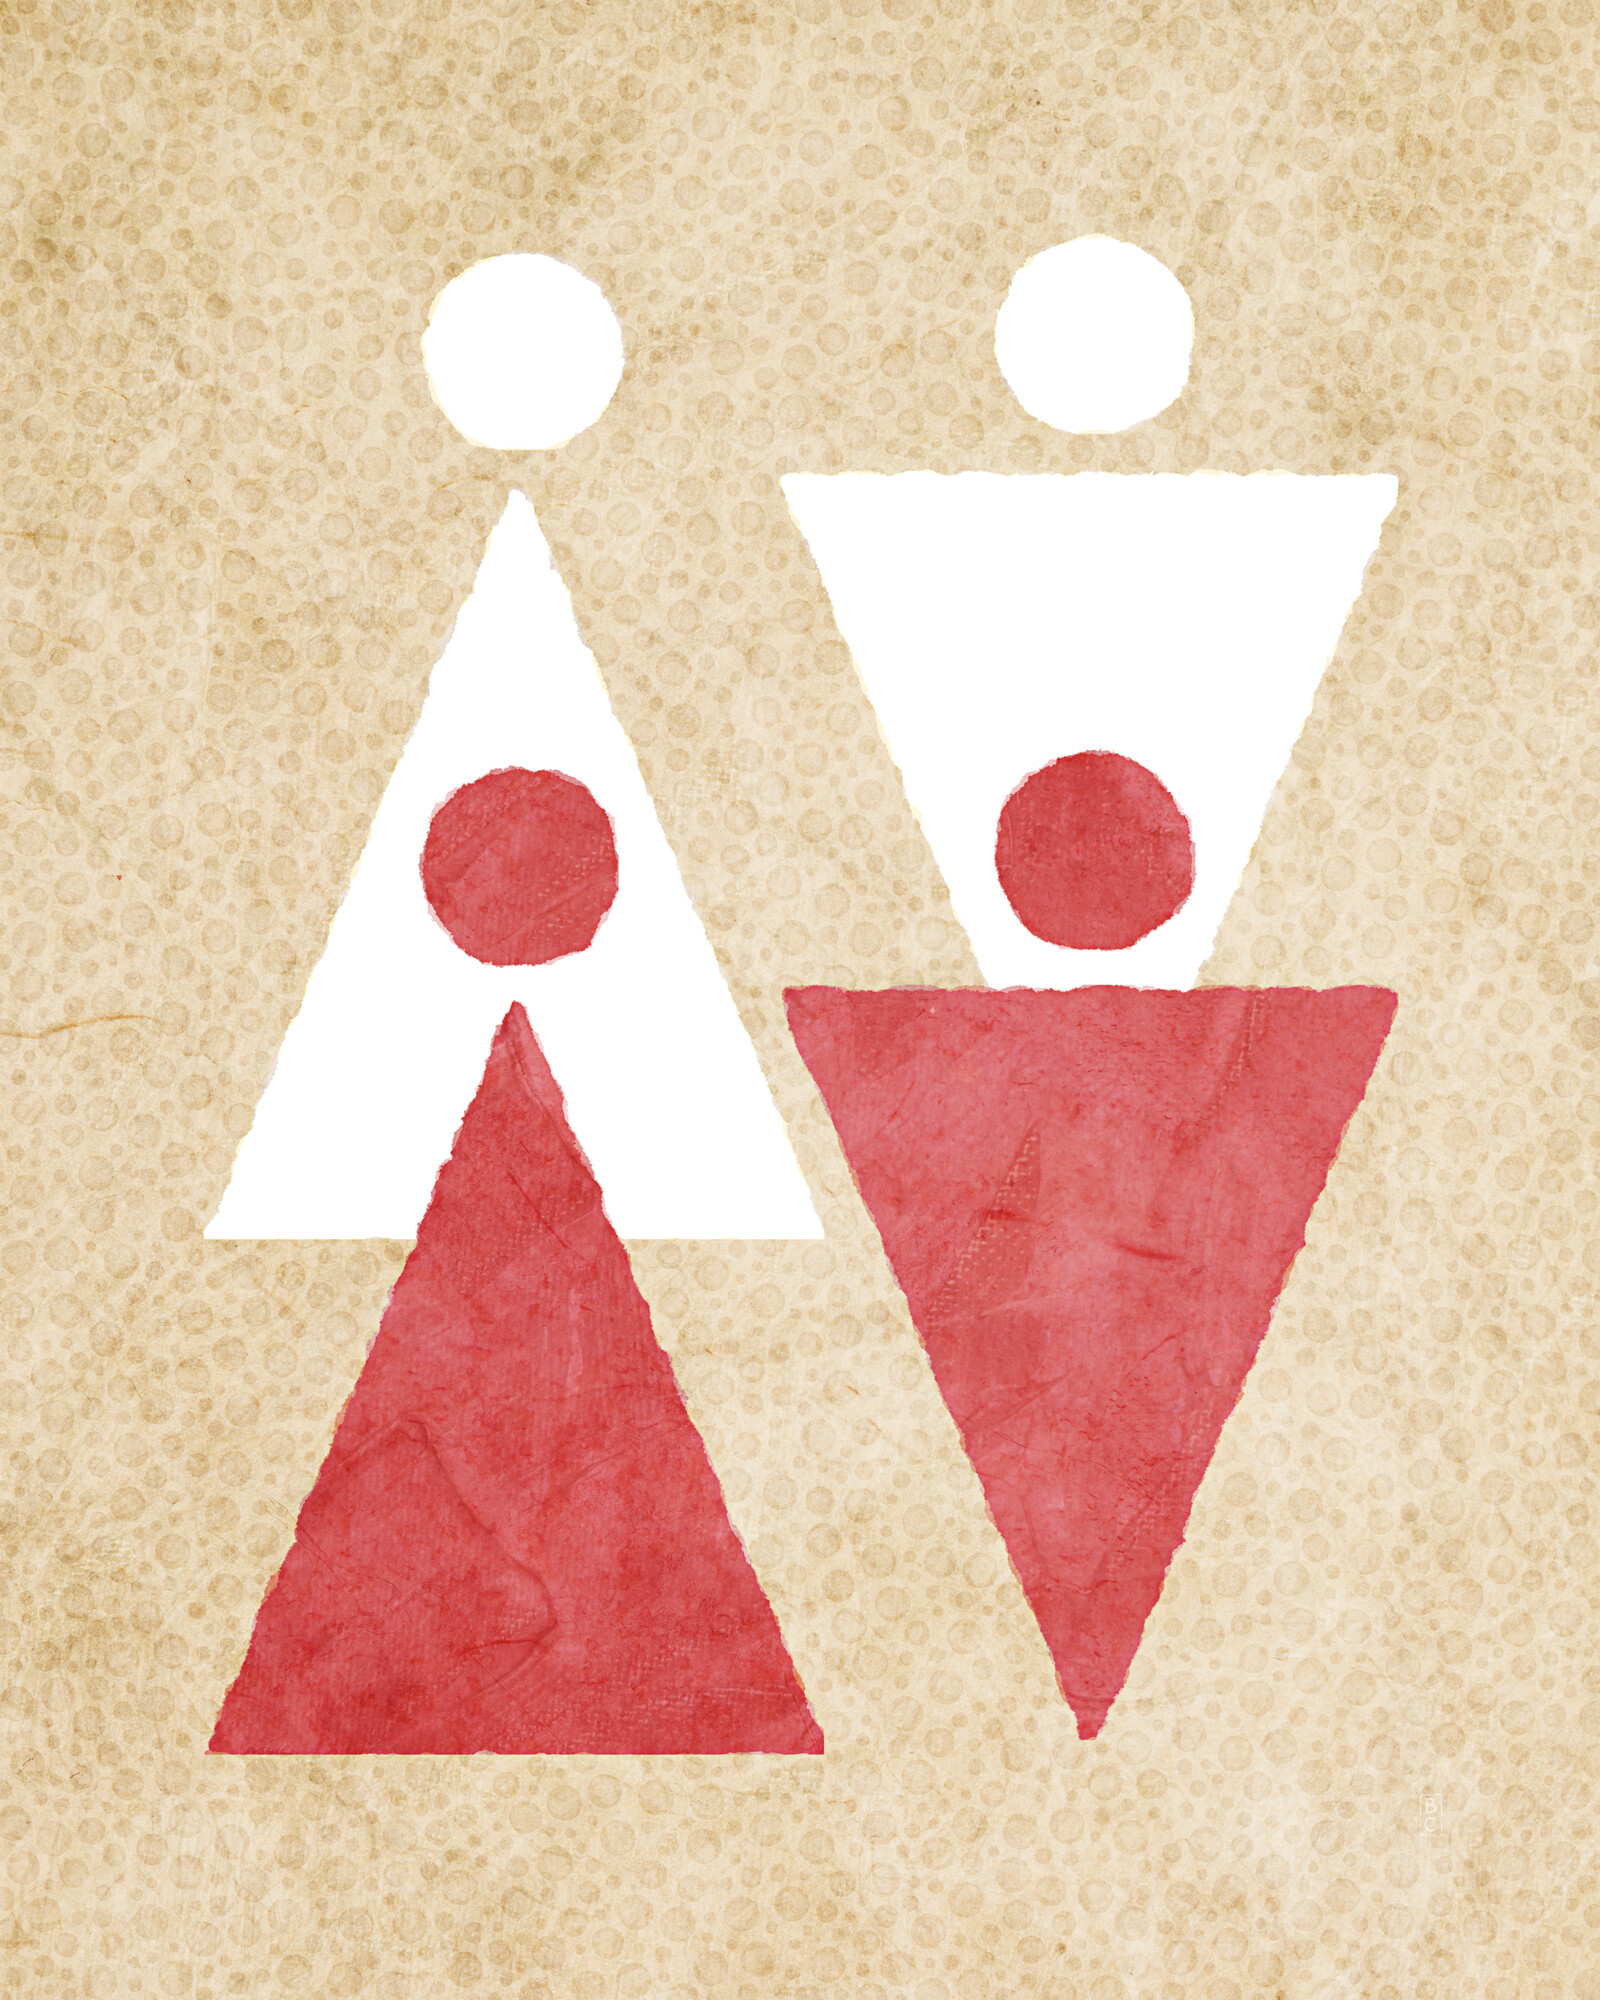 Two white circle-and-triangle figures at top, two red circle-and-triangle figures at bottom.